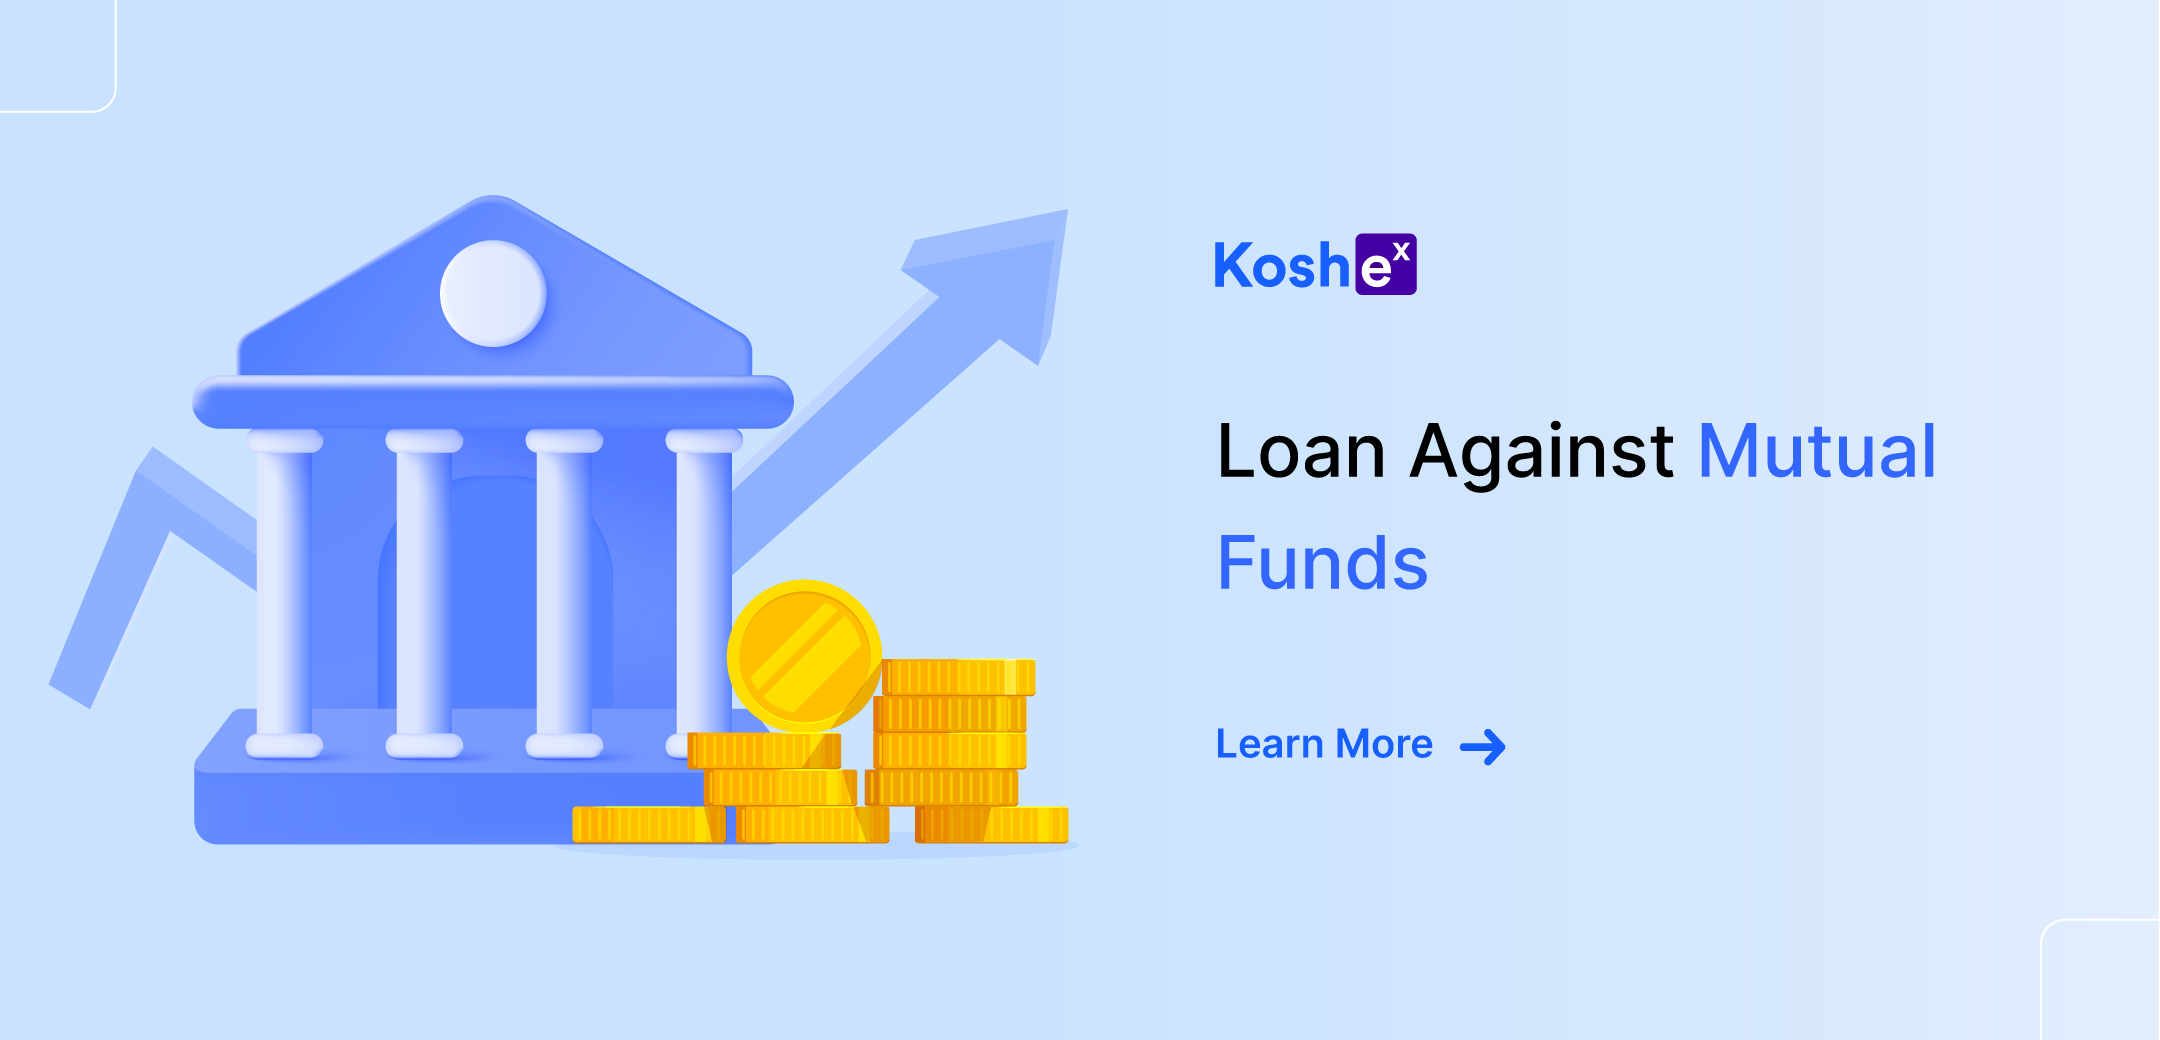 Loan Against Mutual Funds